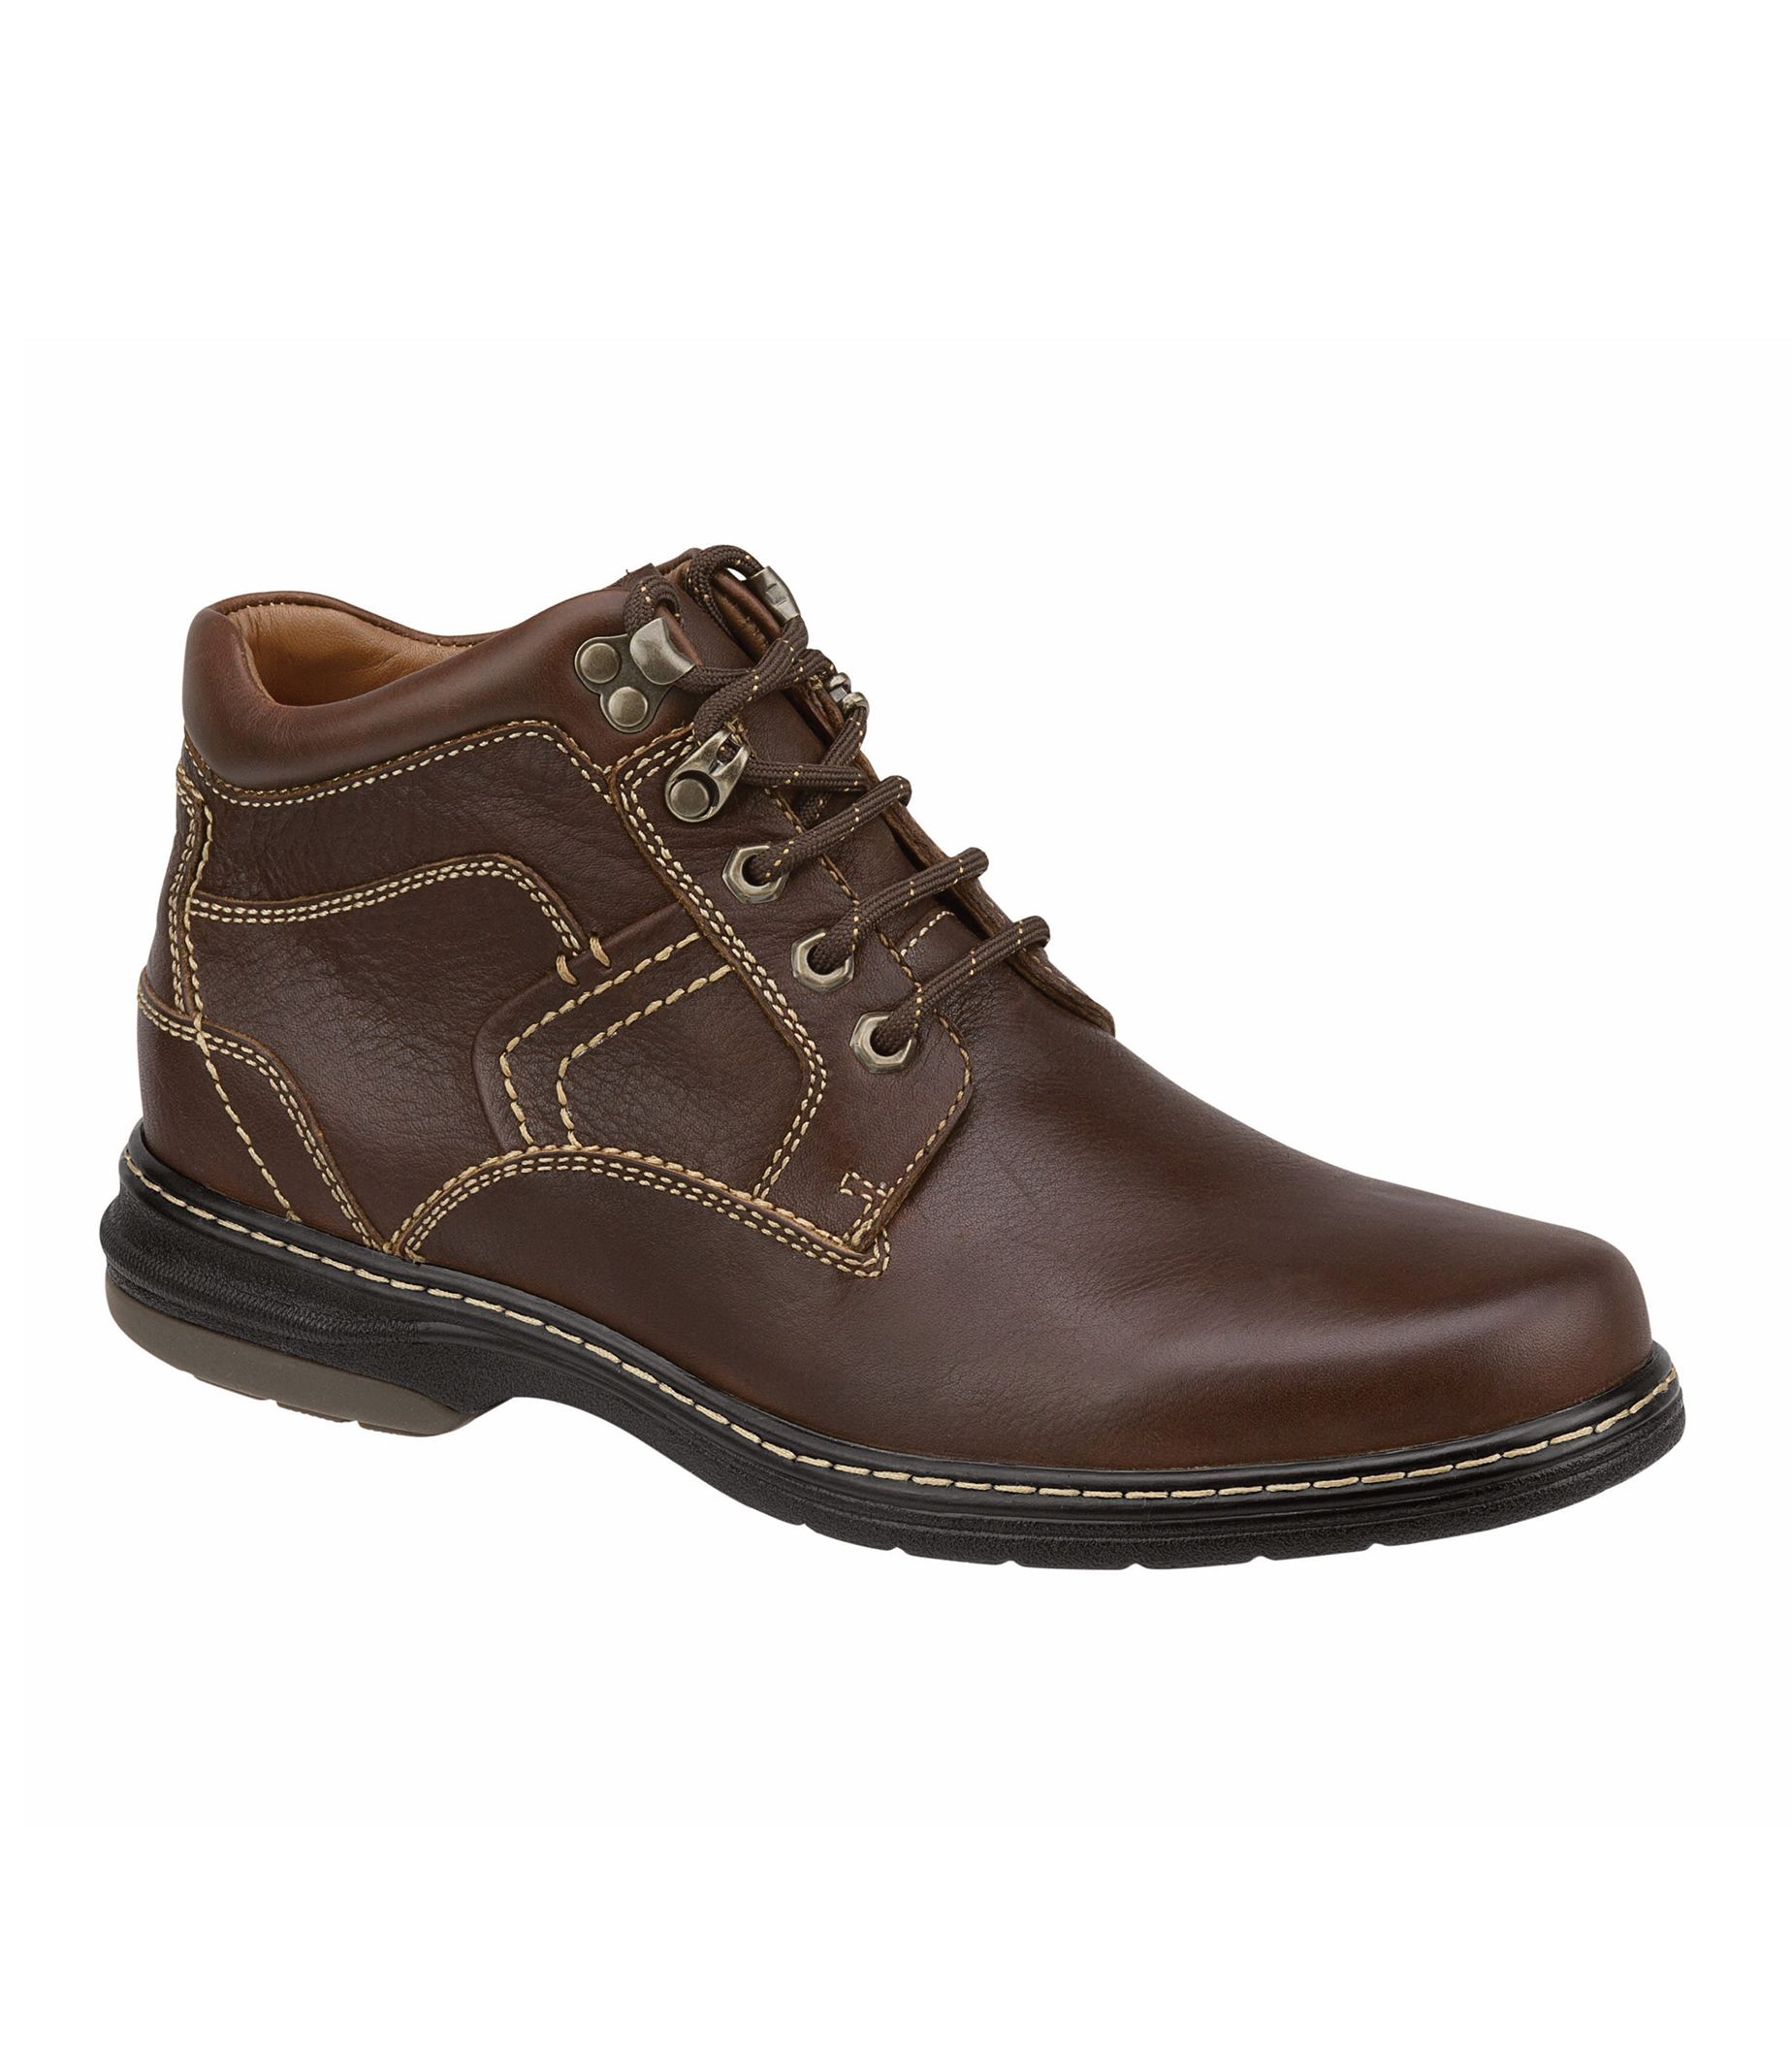 Colvard Plain Toe Boot by Johnston and Murphy